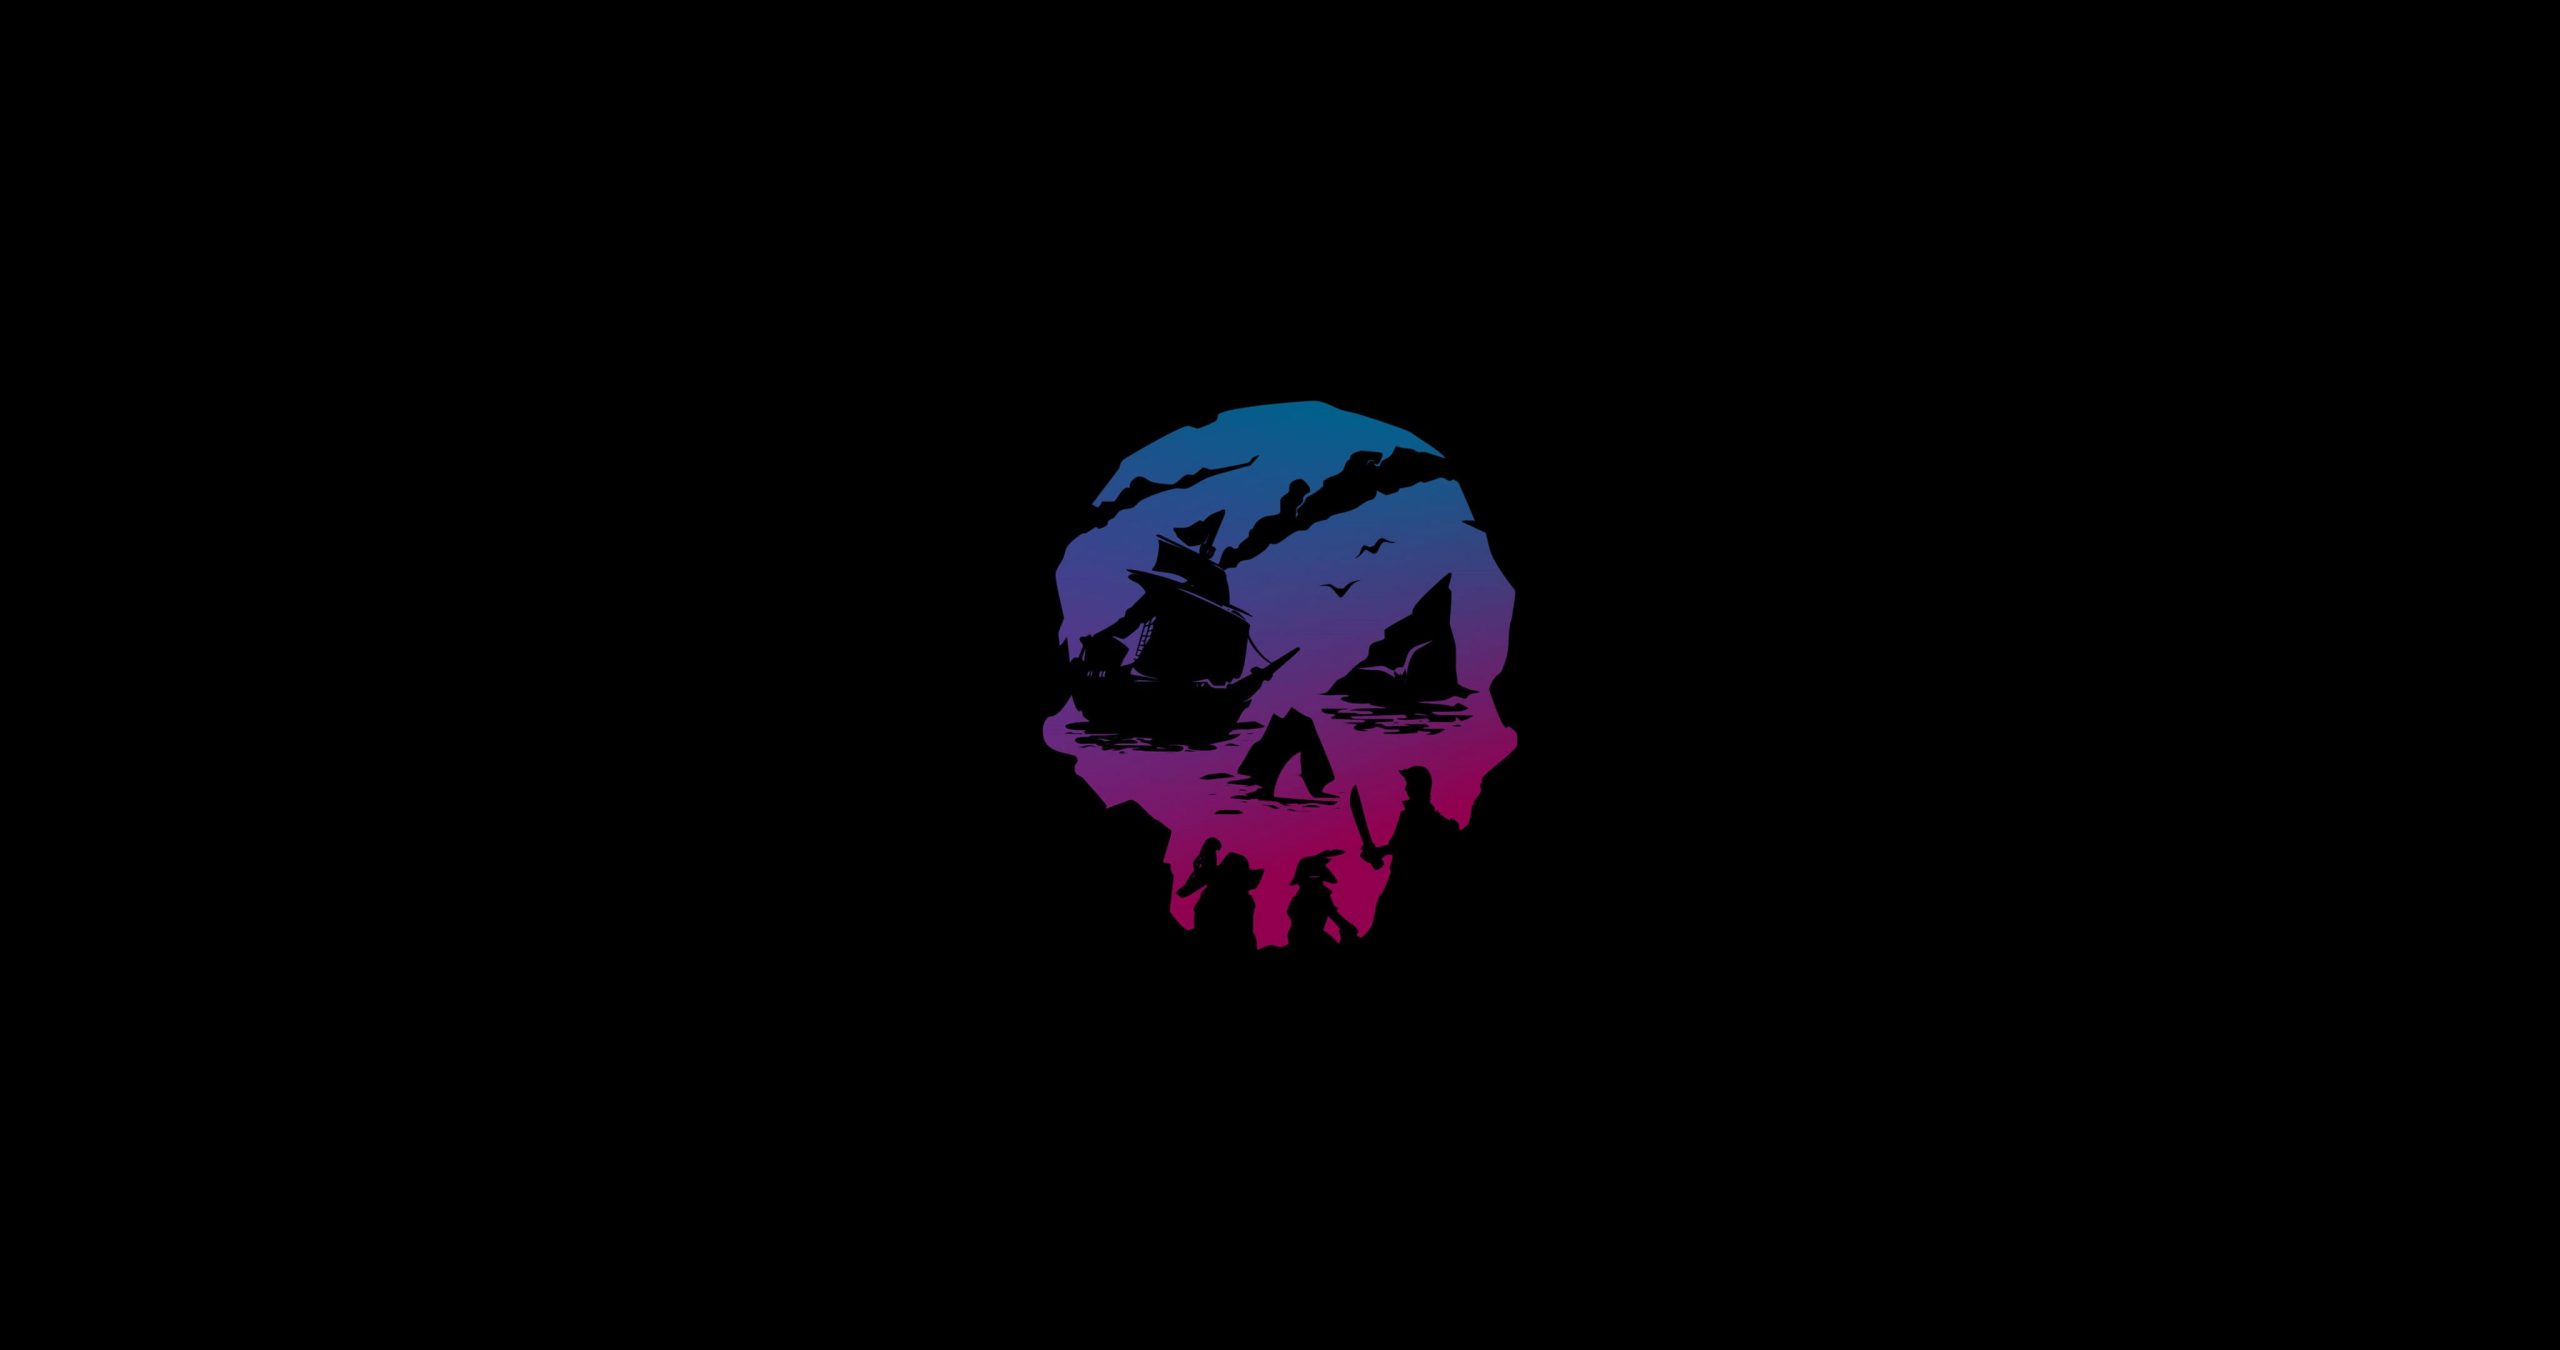 Wallpaper Sea Of Thieves, Neon, Skull, Video Game